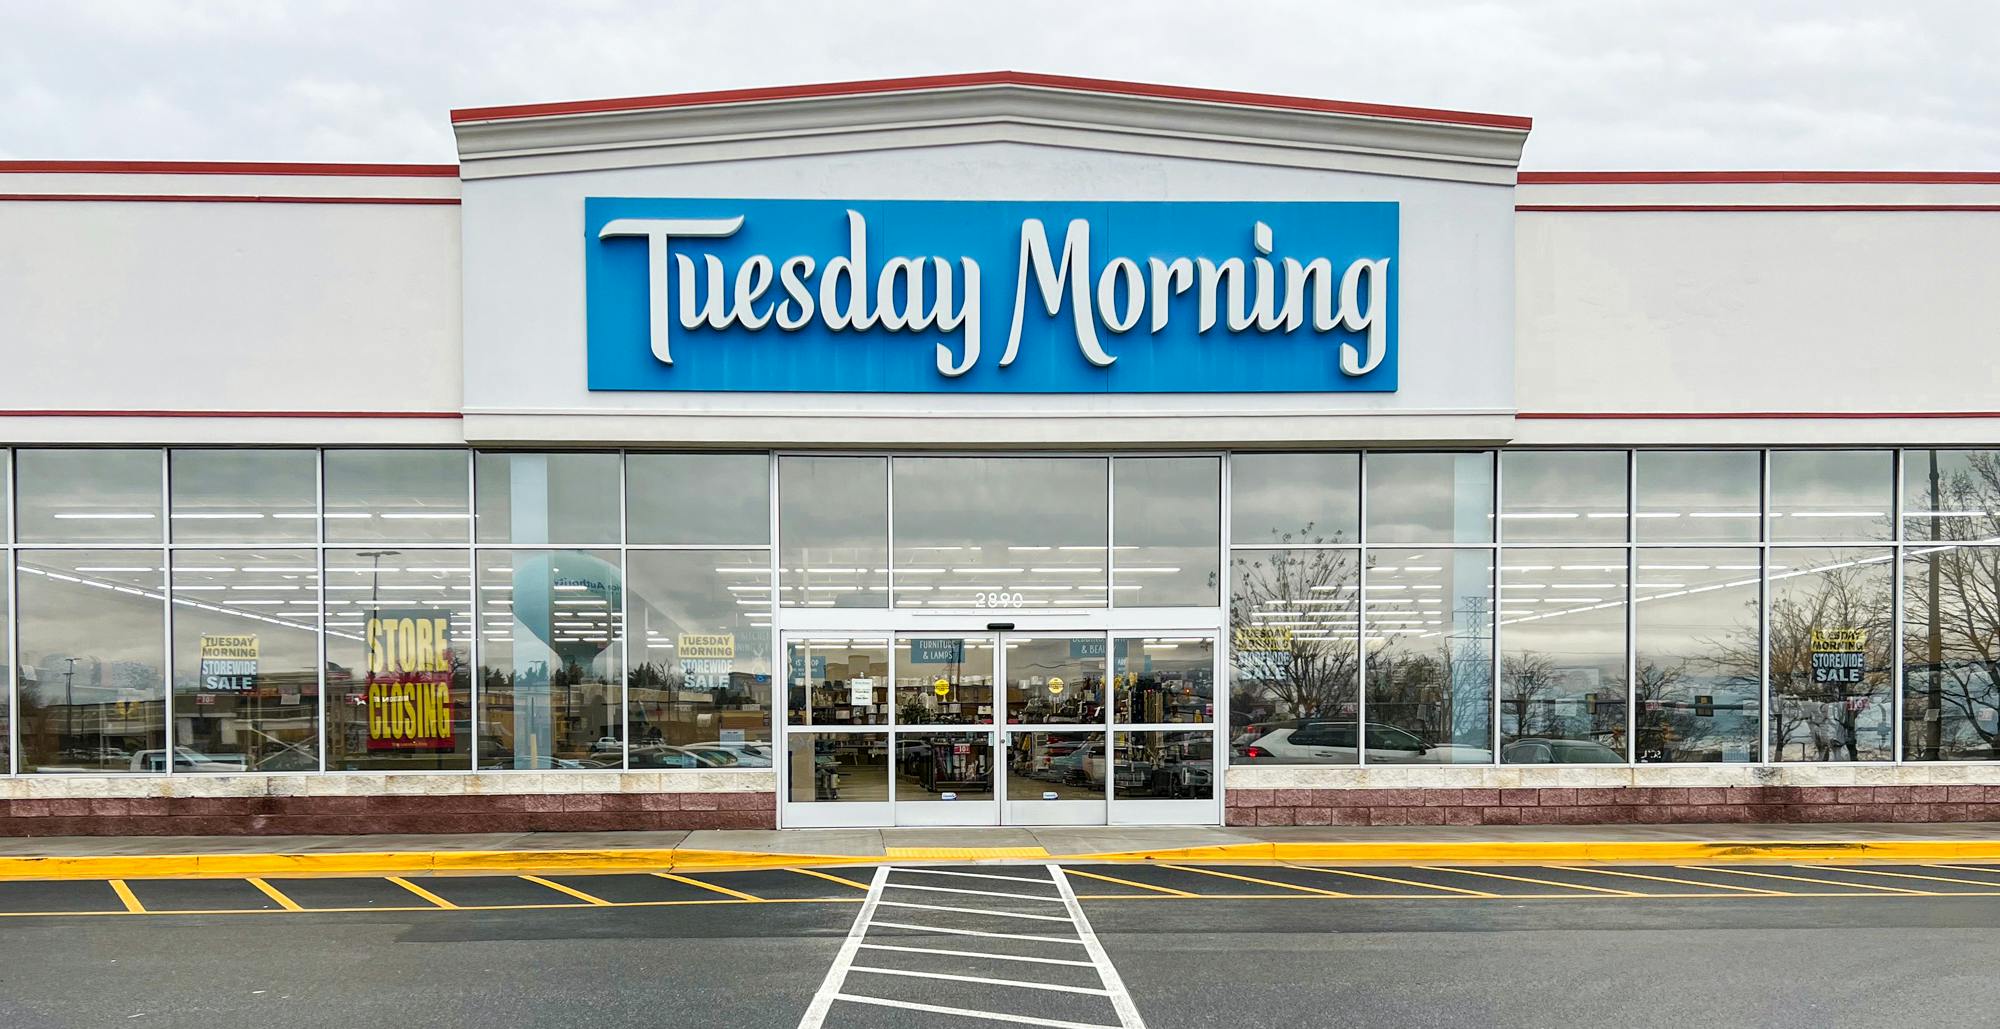 Tuesday Morning Is Closing & Liquidating Half of Their Stores